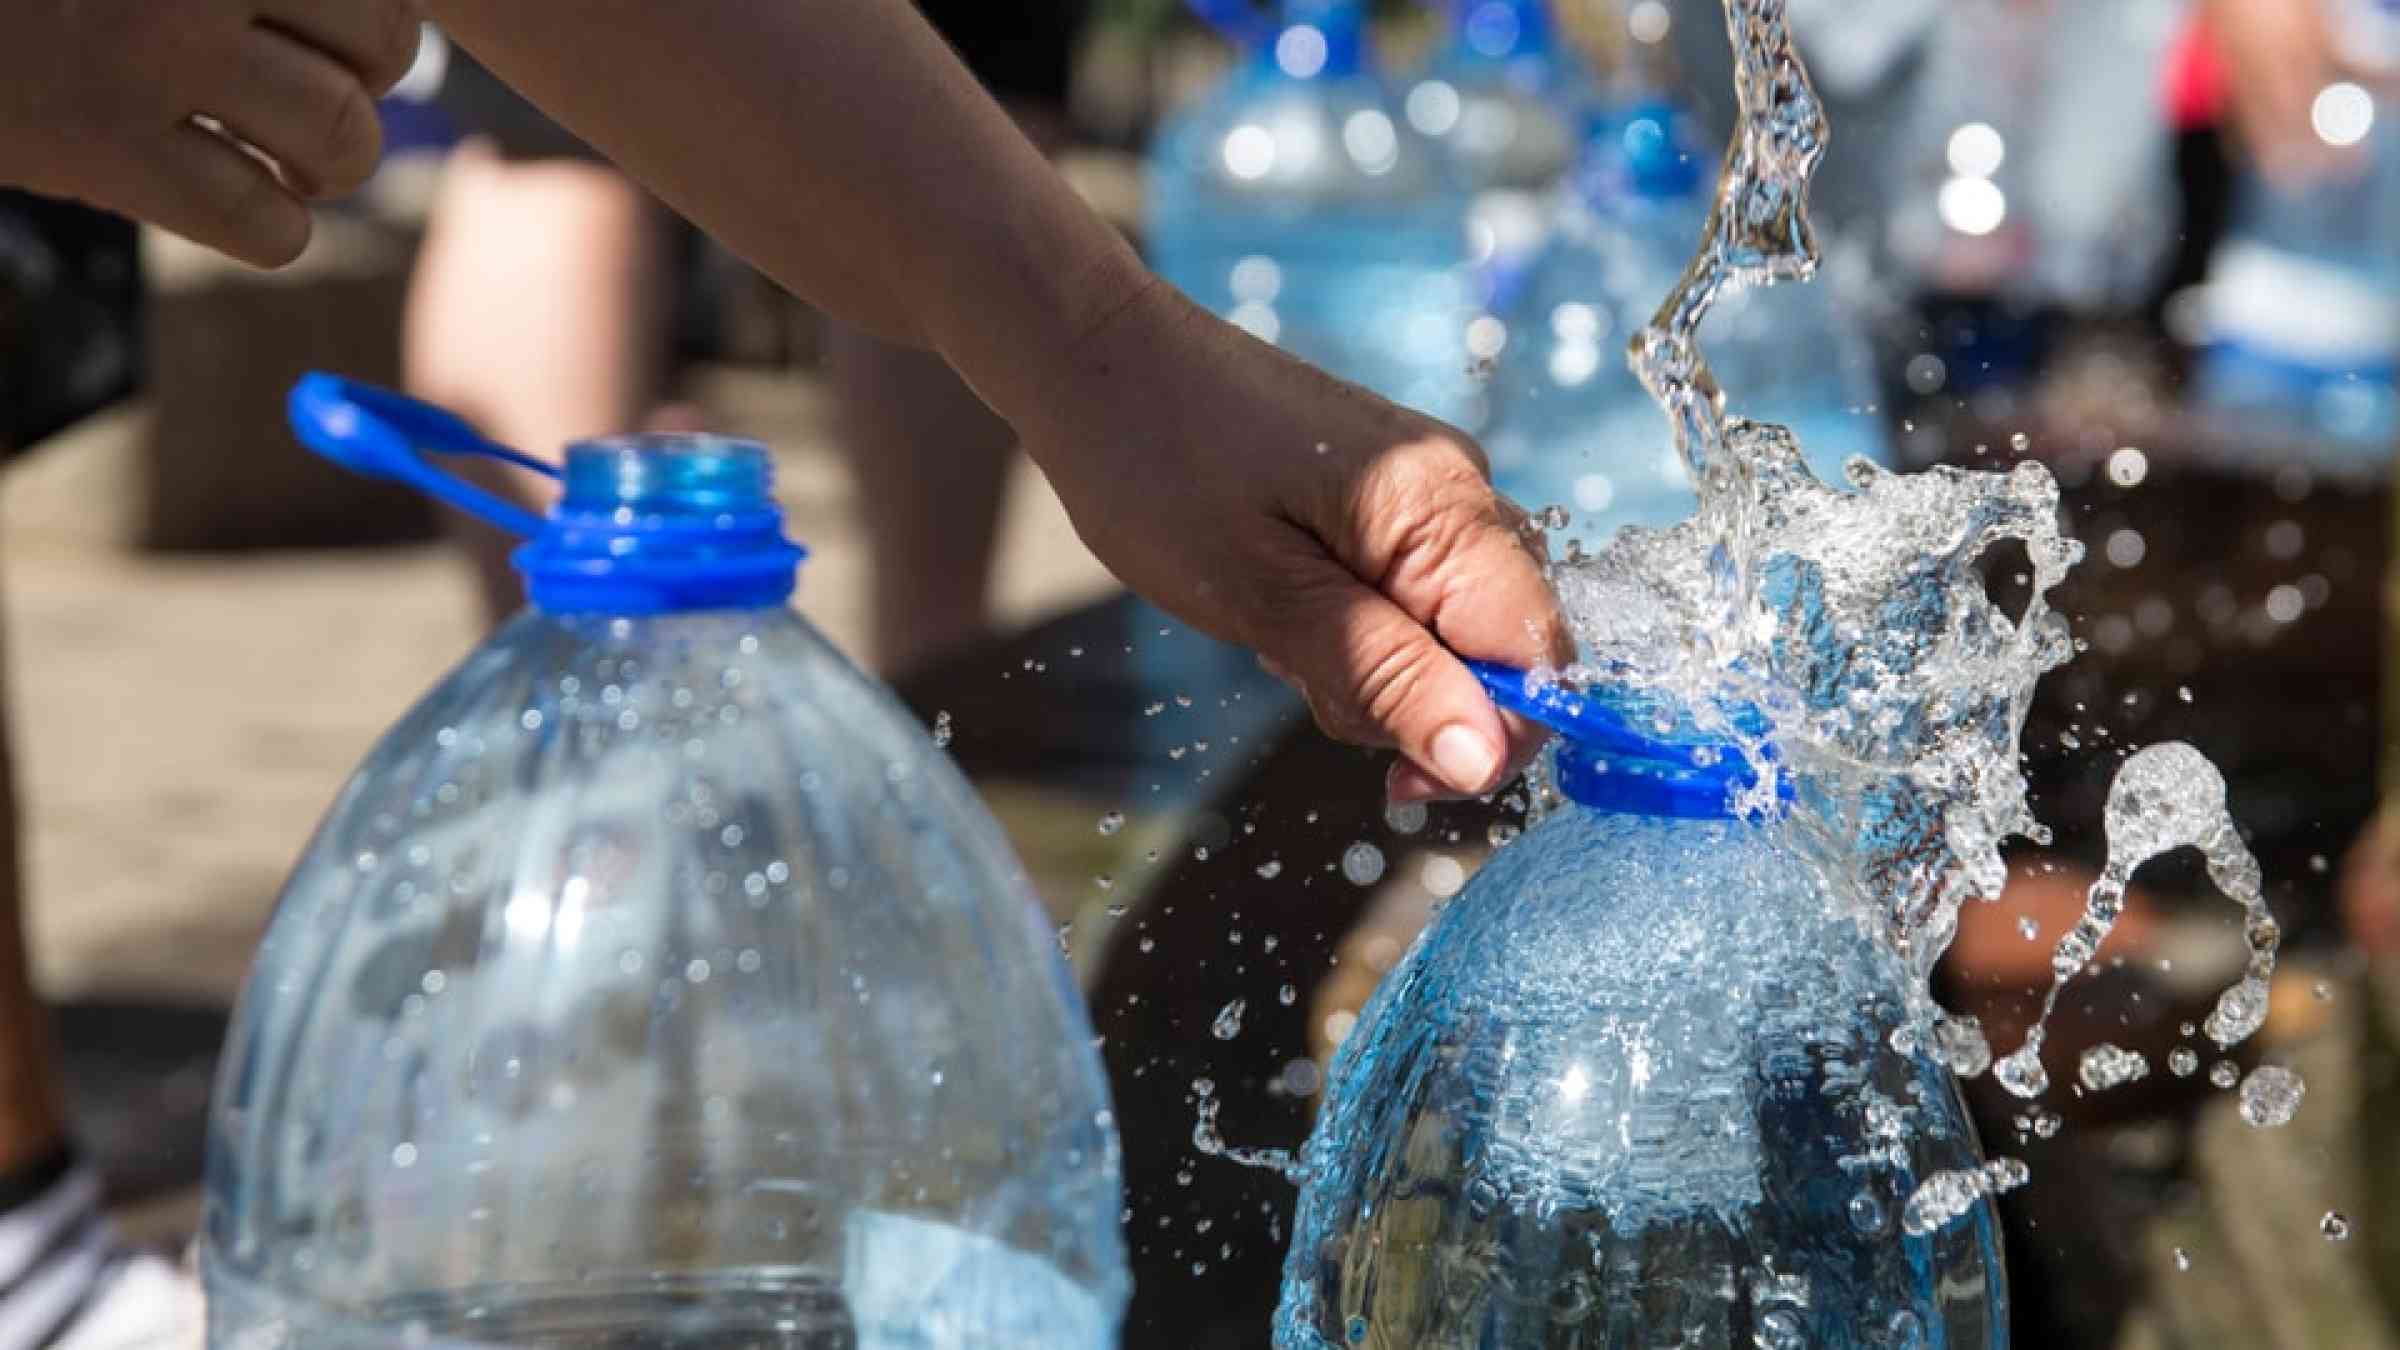 Collecting water during drought in Cape Town